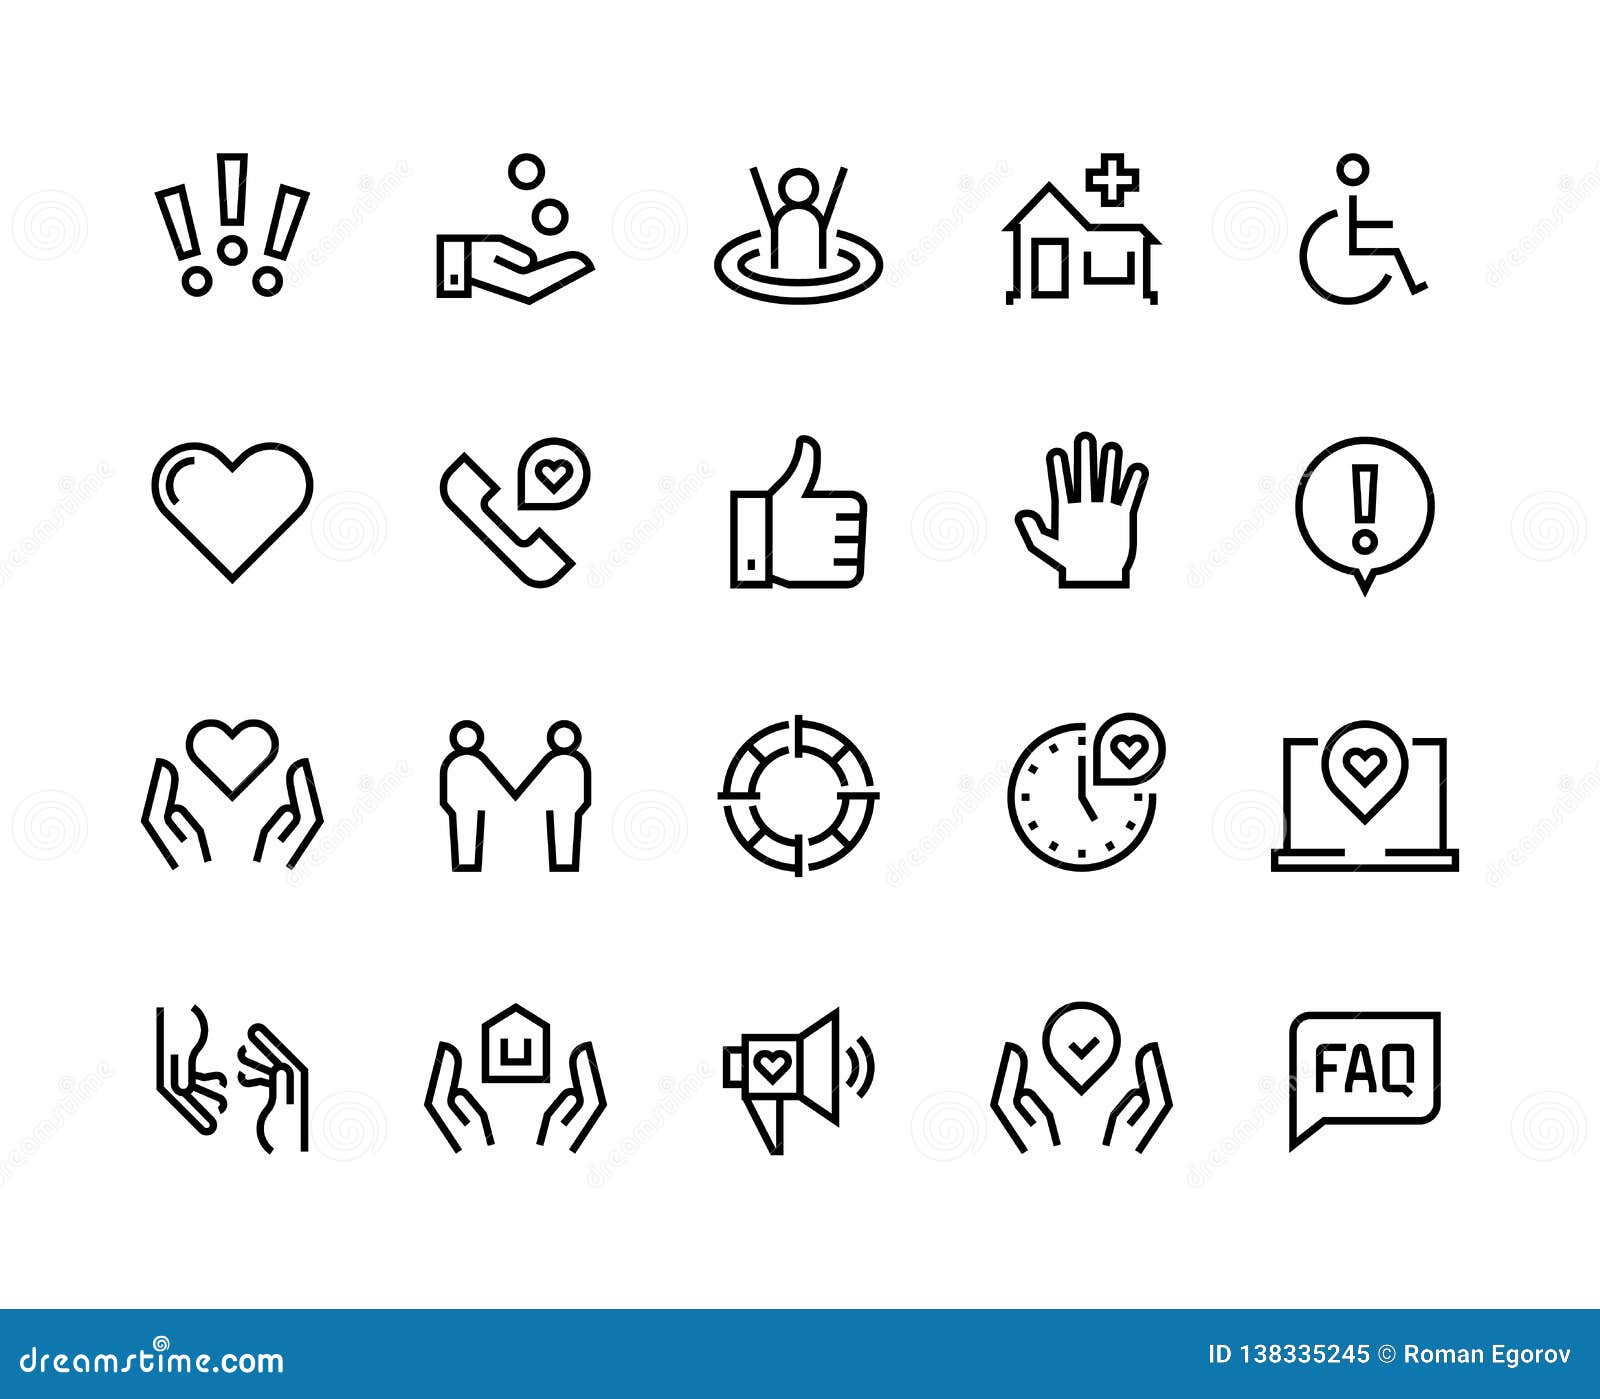 help line icons. support health care, manual faq guide, family life care community charity donate. help and support set